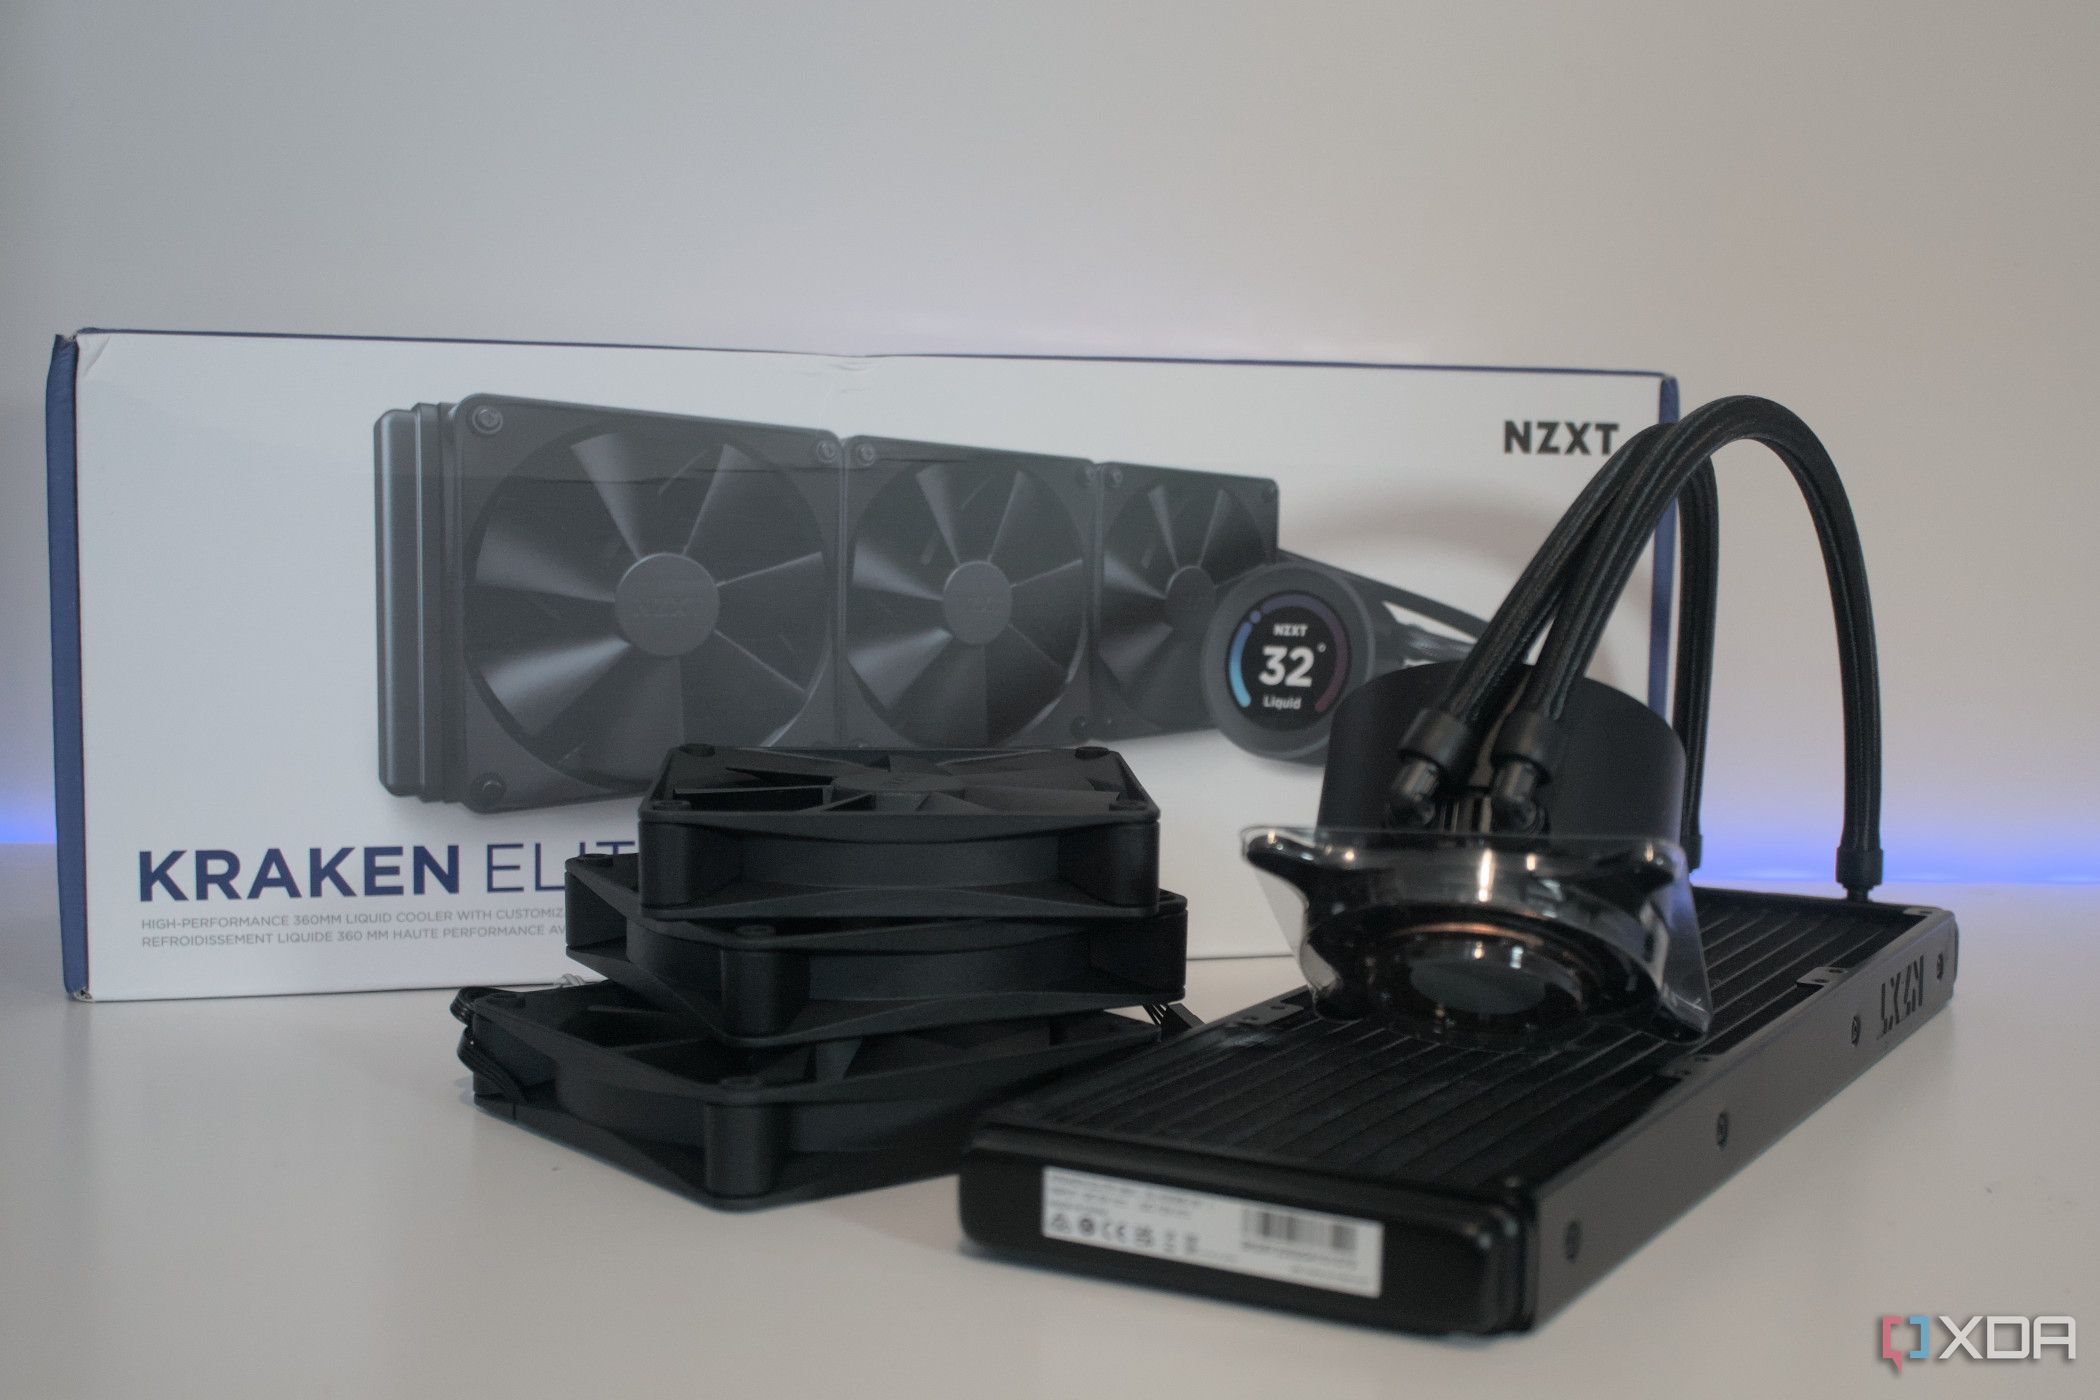 NZXT Kraken Elite 360 review: Beefy cooling for a flagship AMD or